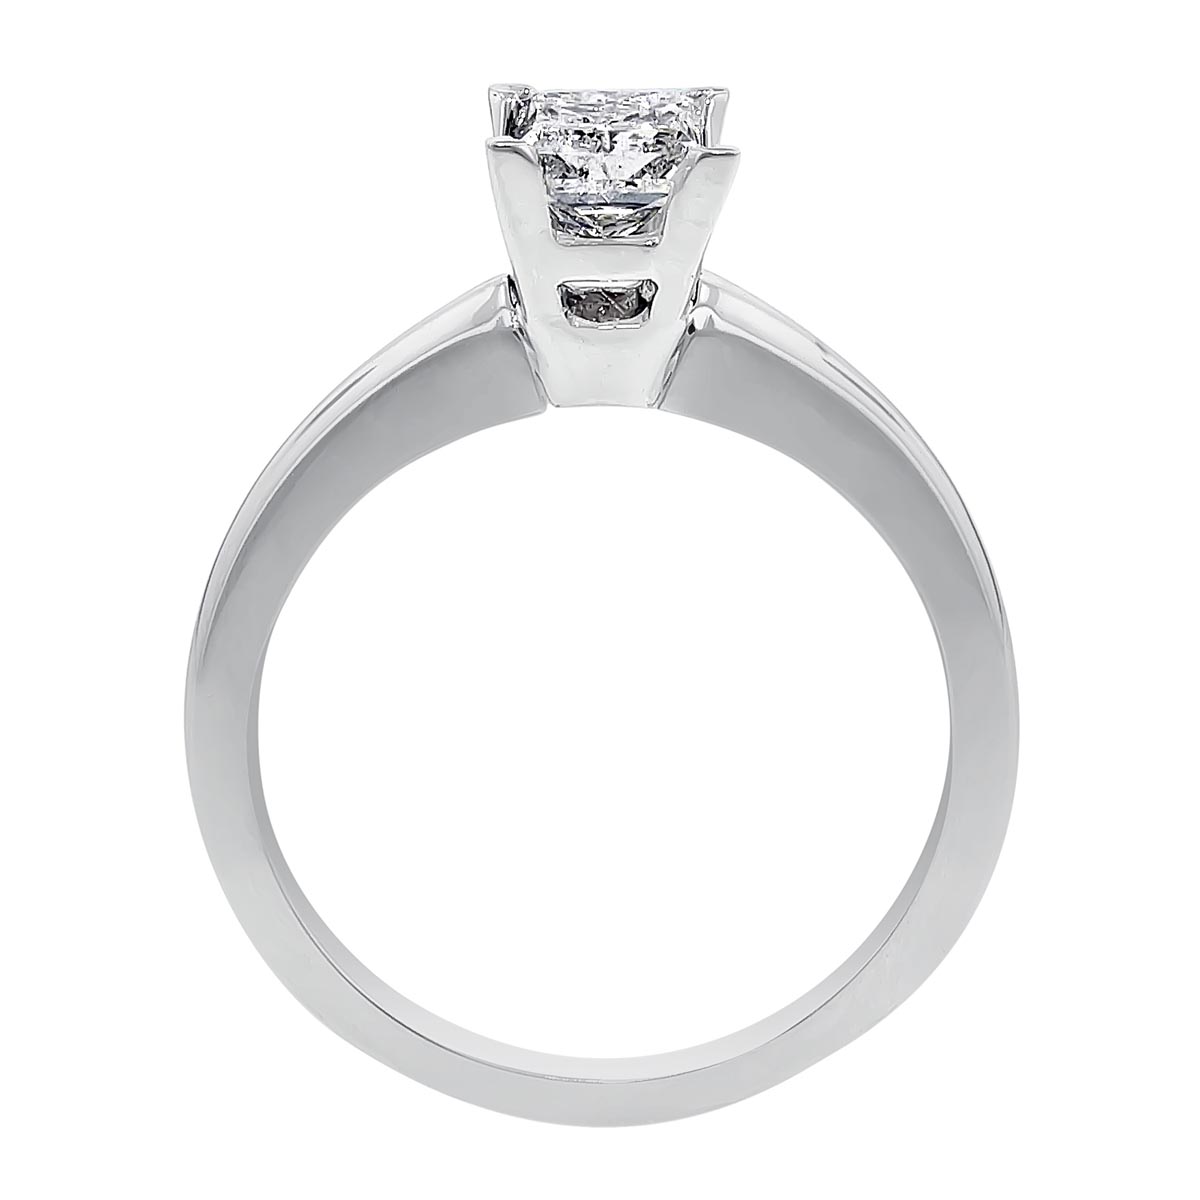 Princess Diamond Solitaire Engagement Ring in 14kt White Gold (3/4ct)